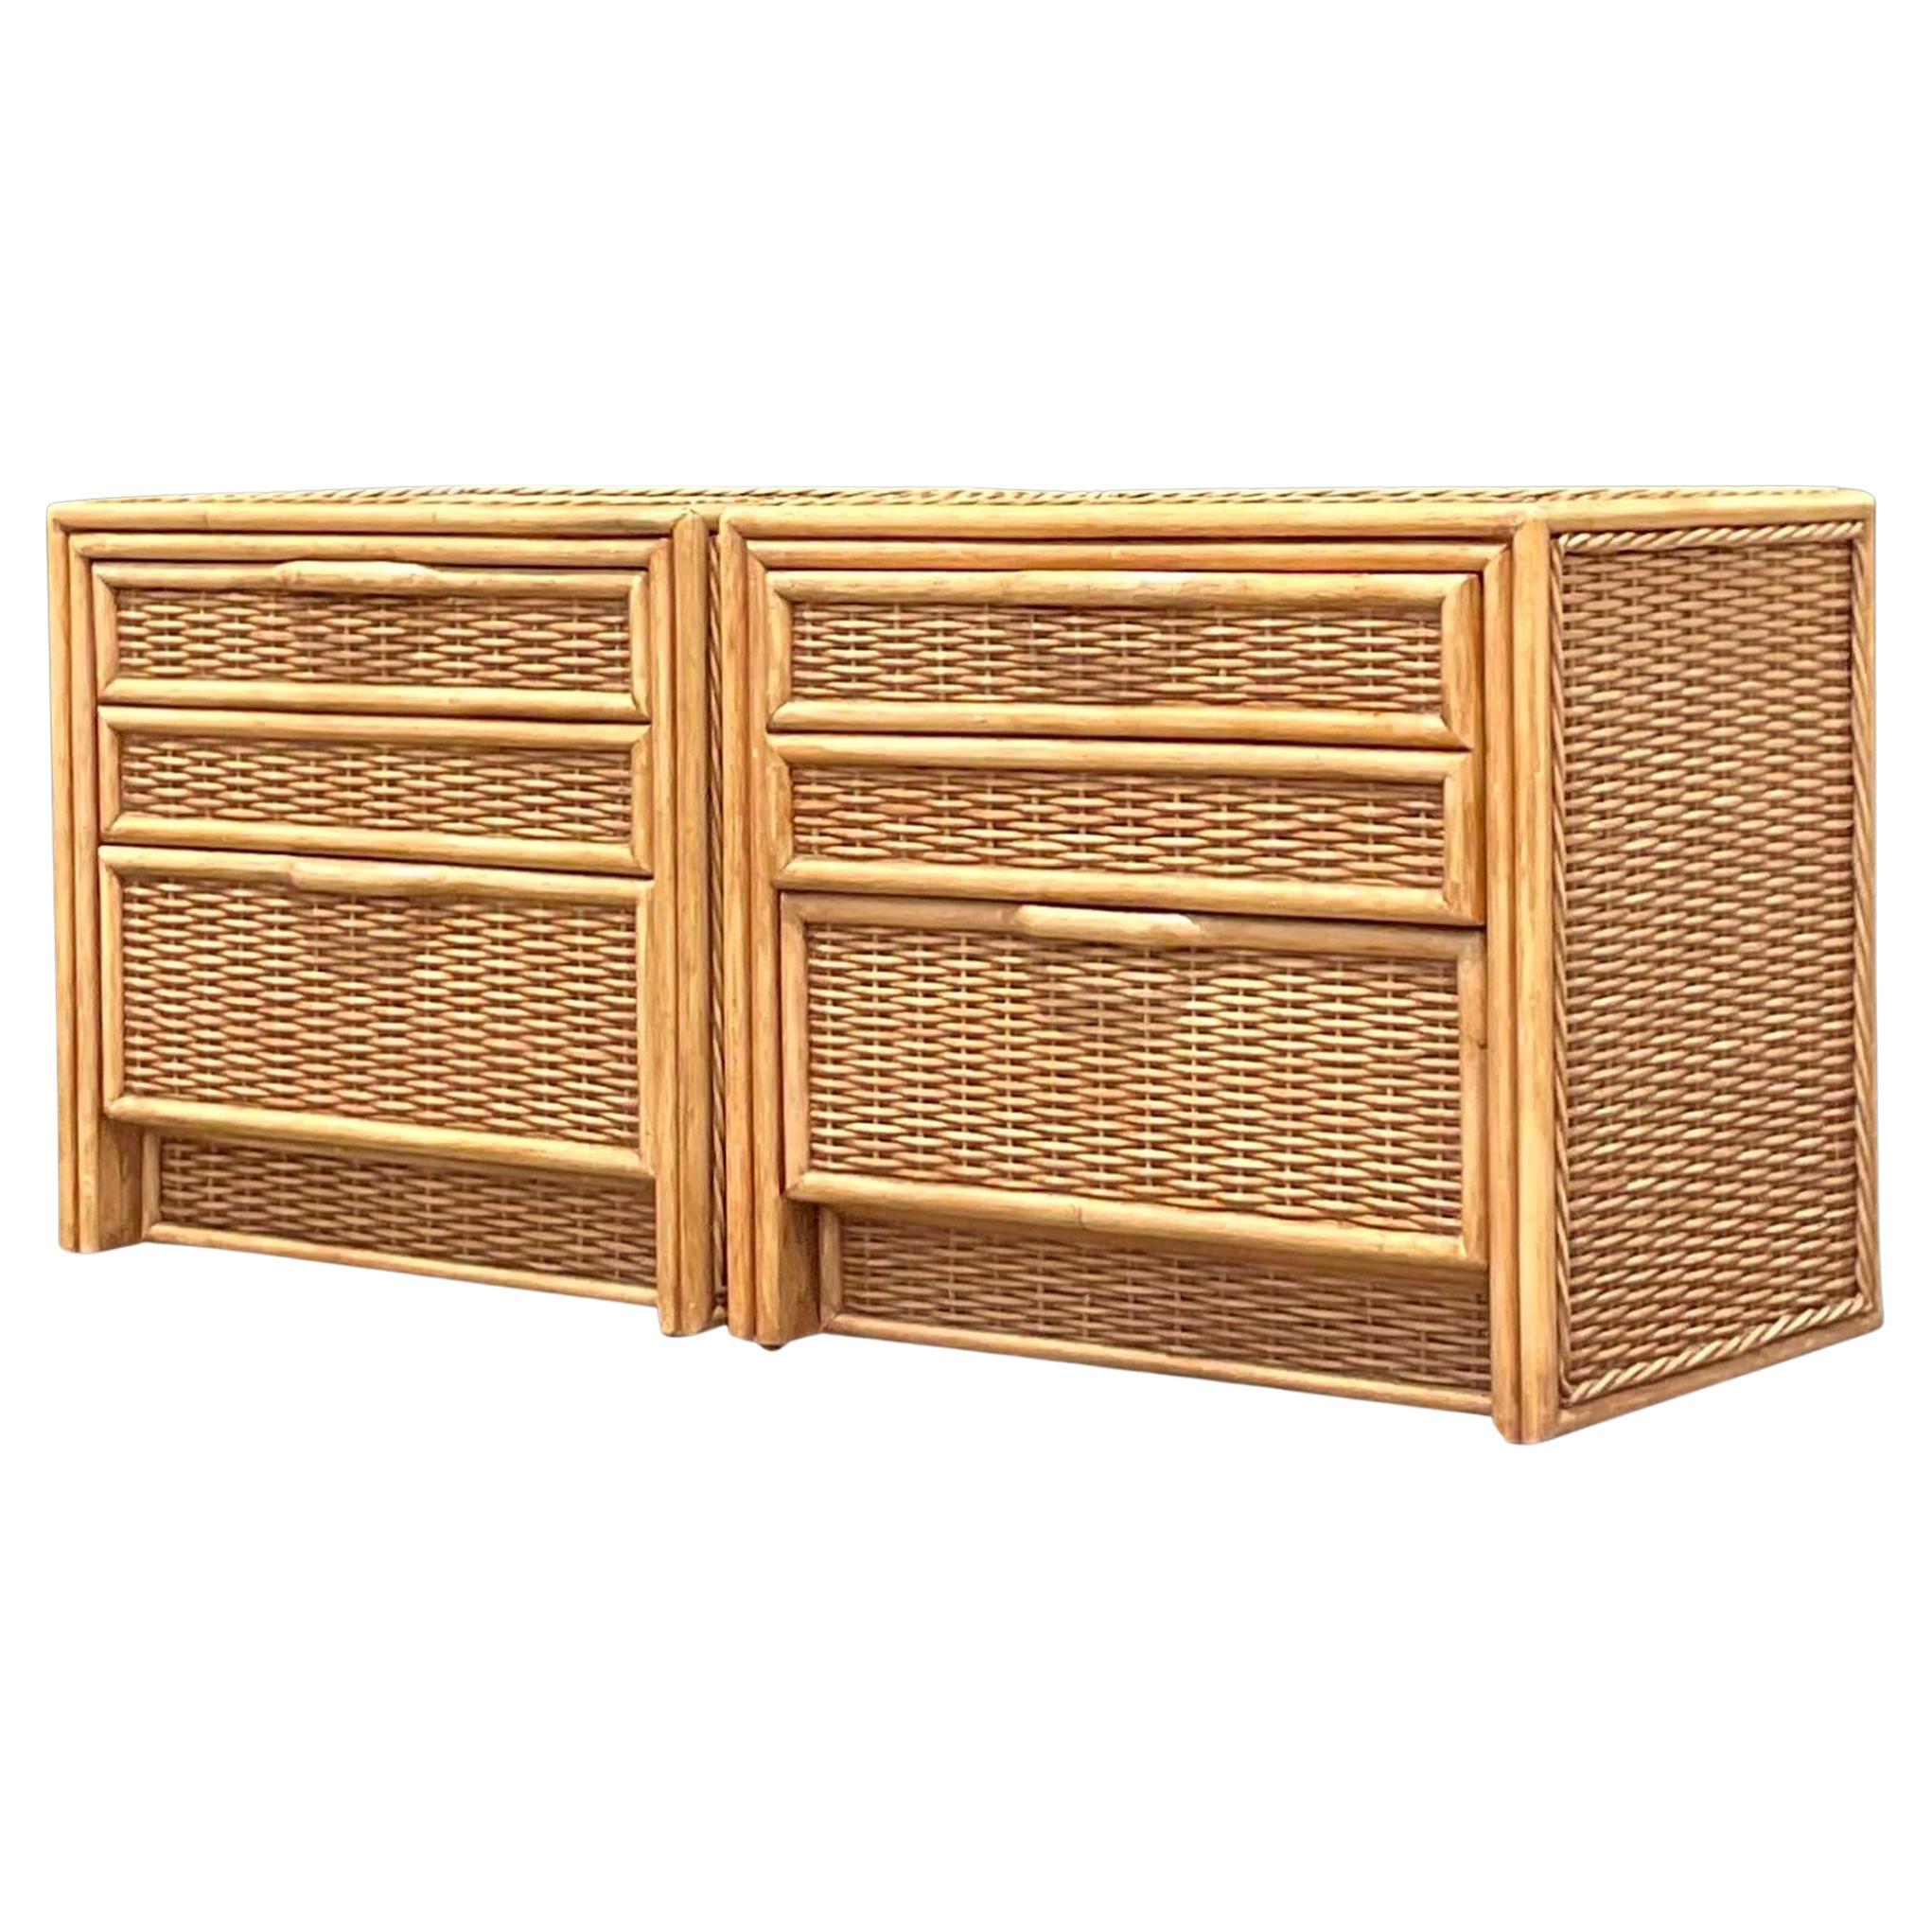 Late 20th Century Vintage Coastal Woven Rattan Nightstands - a Pair For Sale